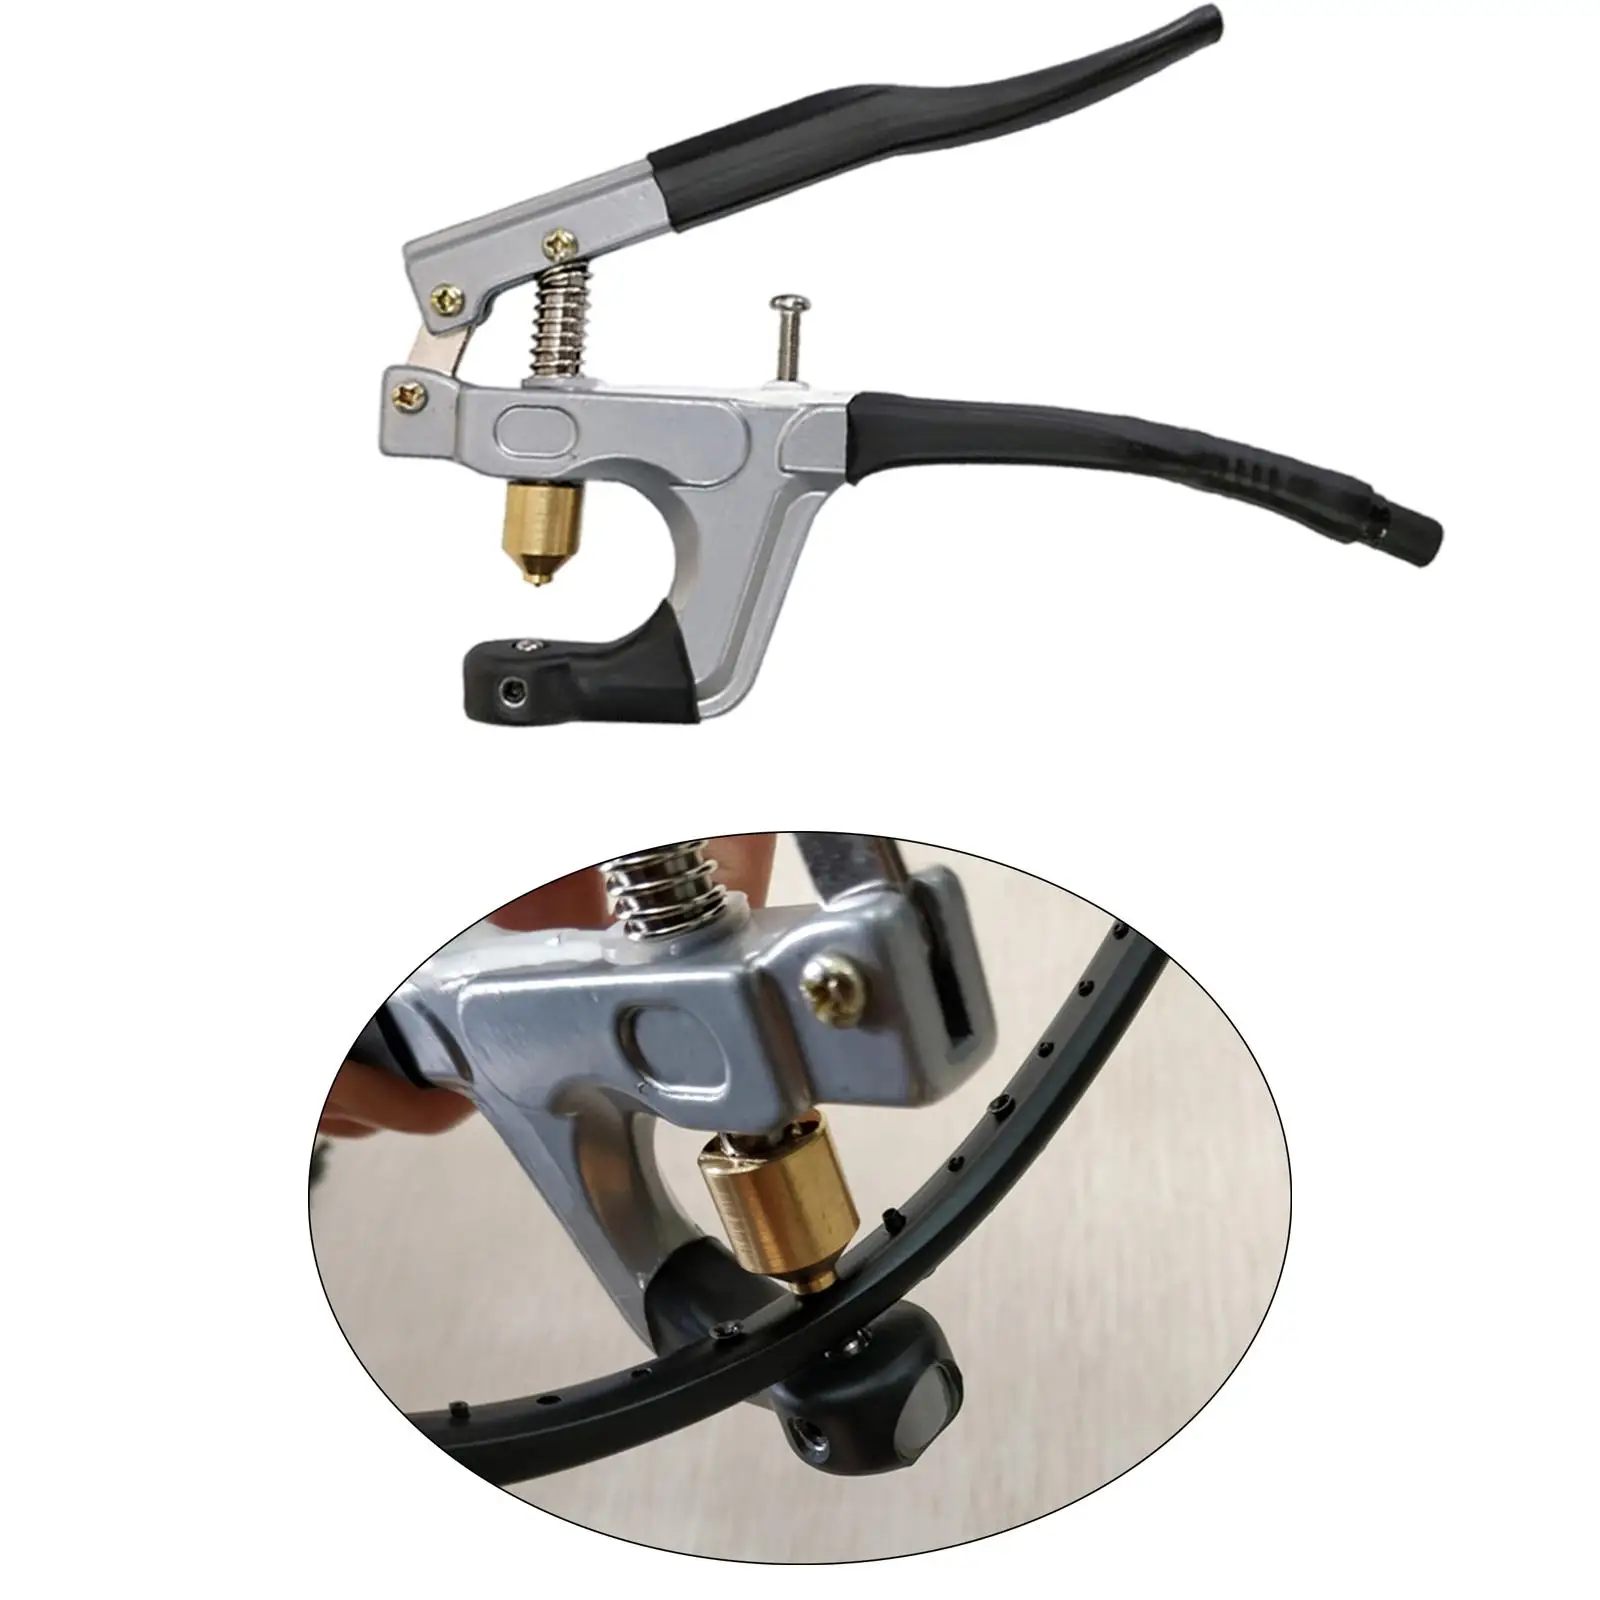 Accessory for Hot Pressure Pliers for Stringing Instruments of The